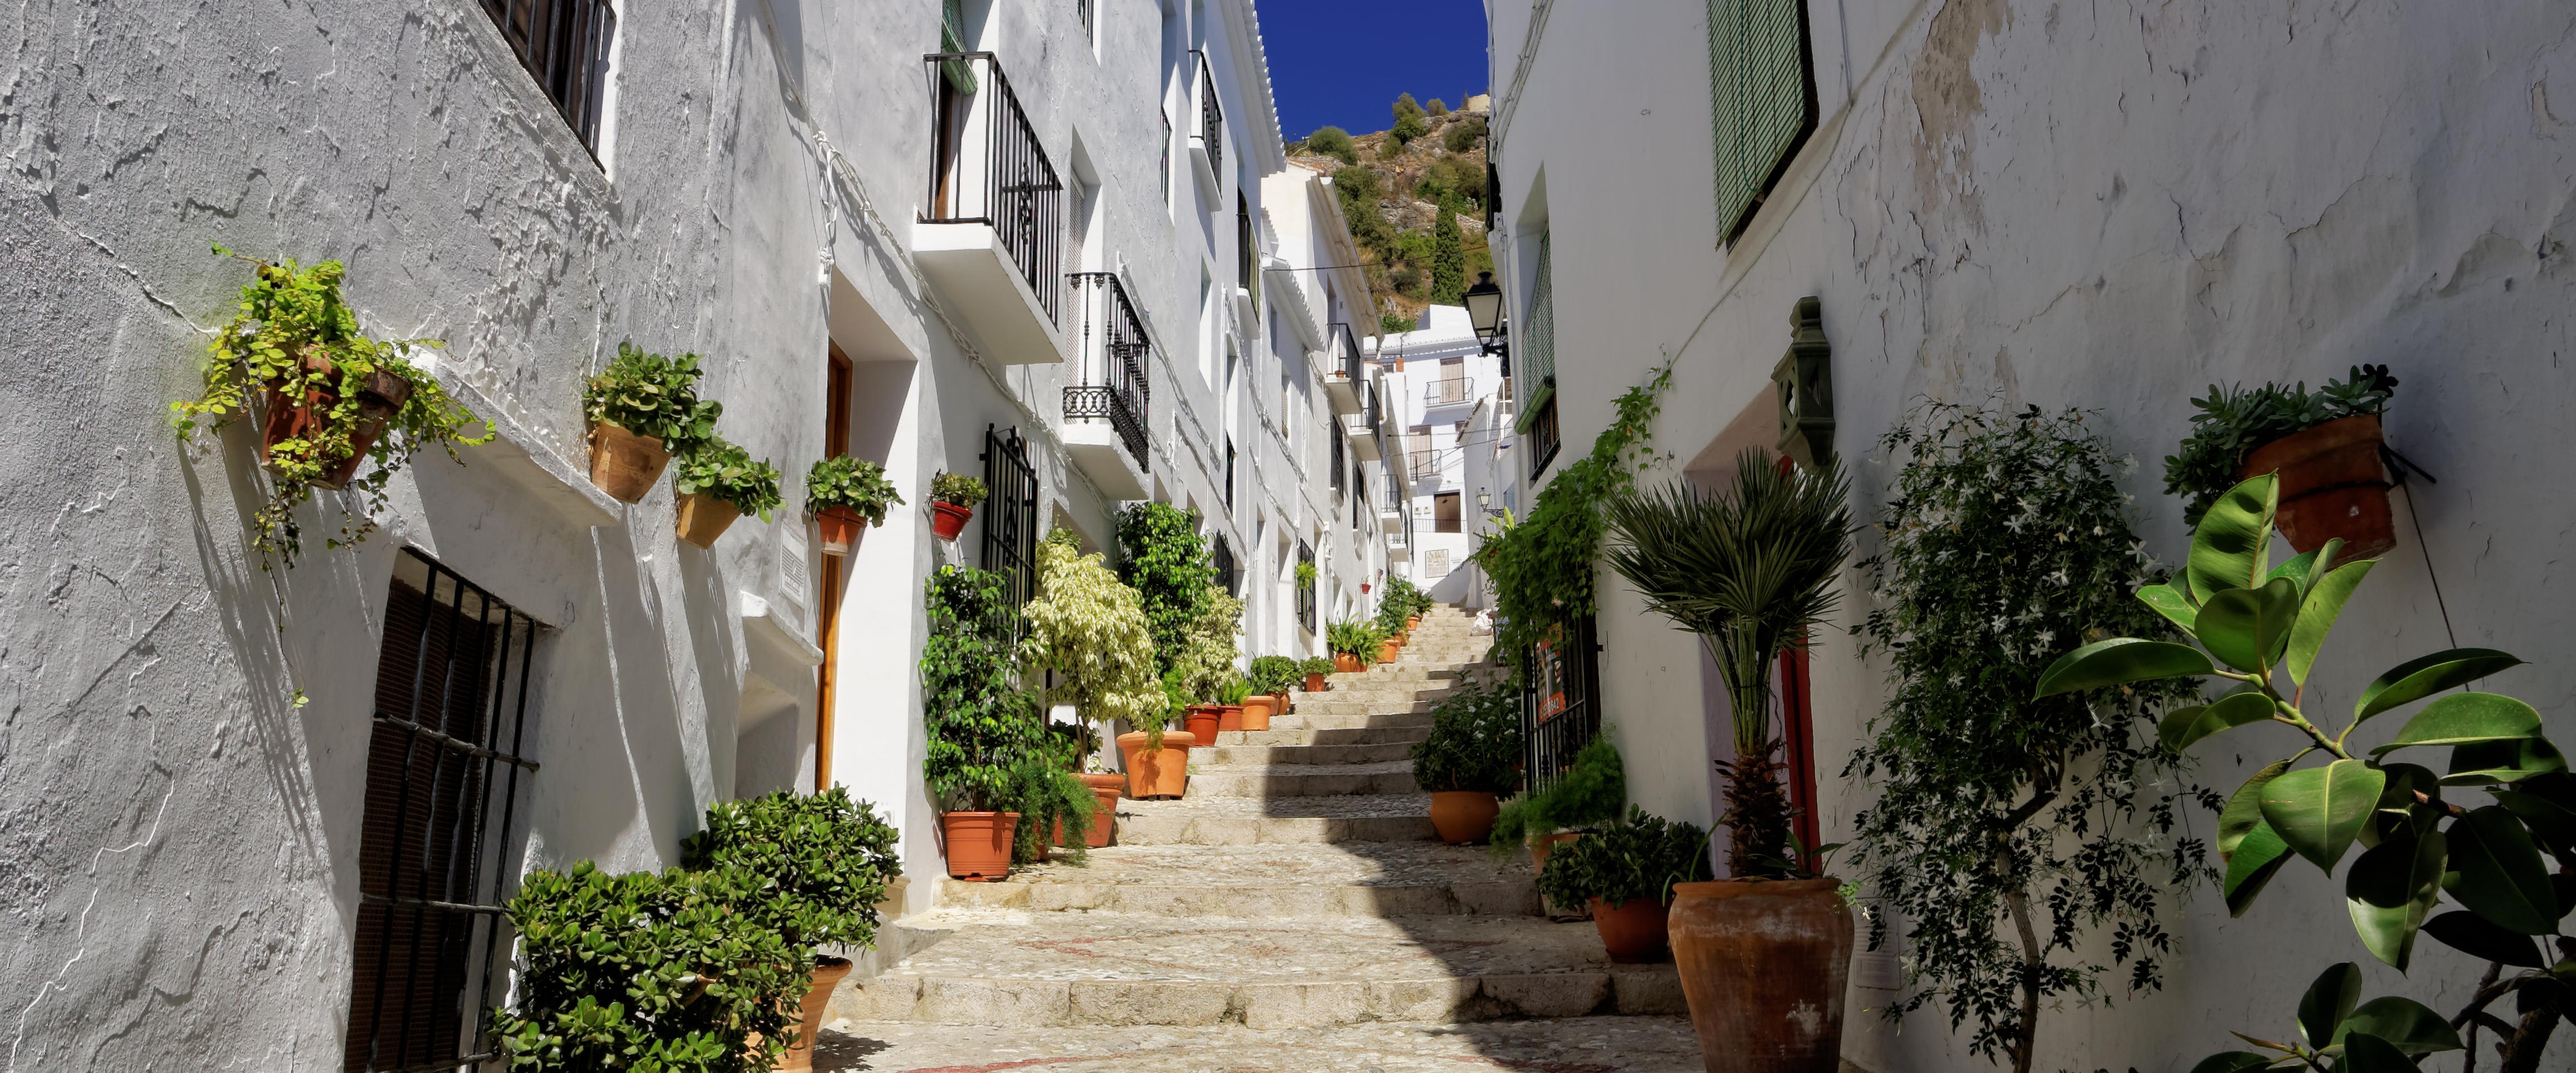 Guided Excursion to Frigiliana and Nerja – Leaving from Malaga